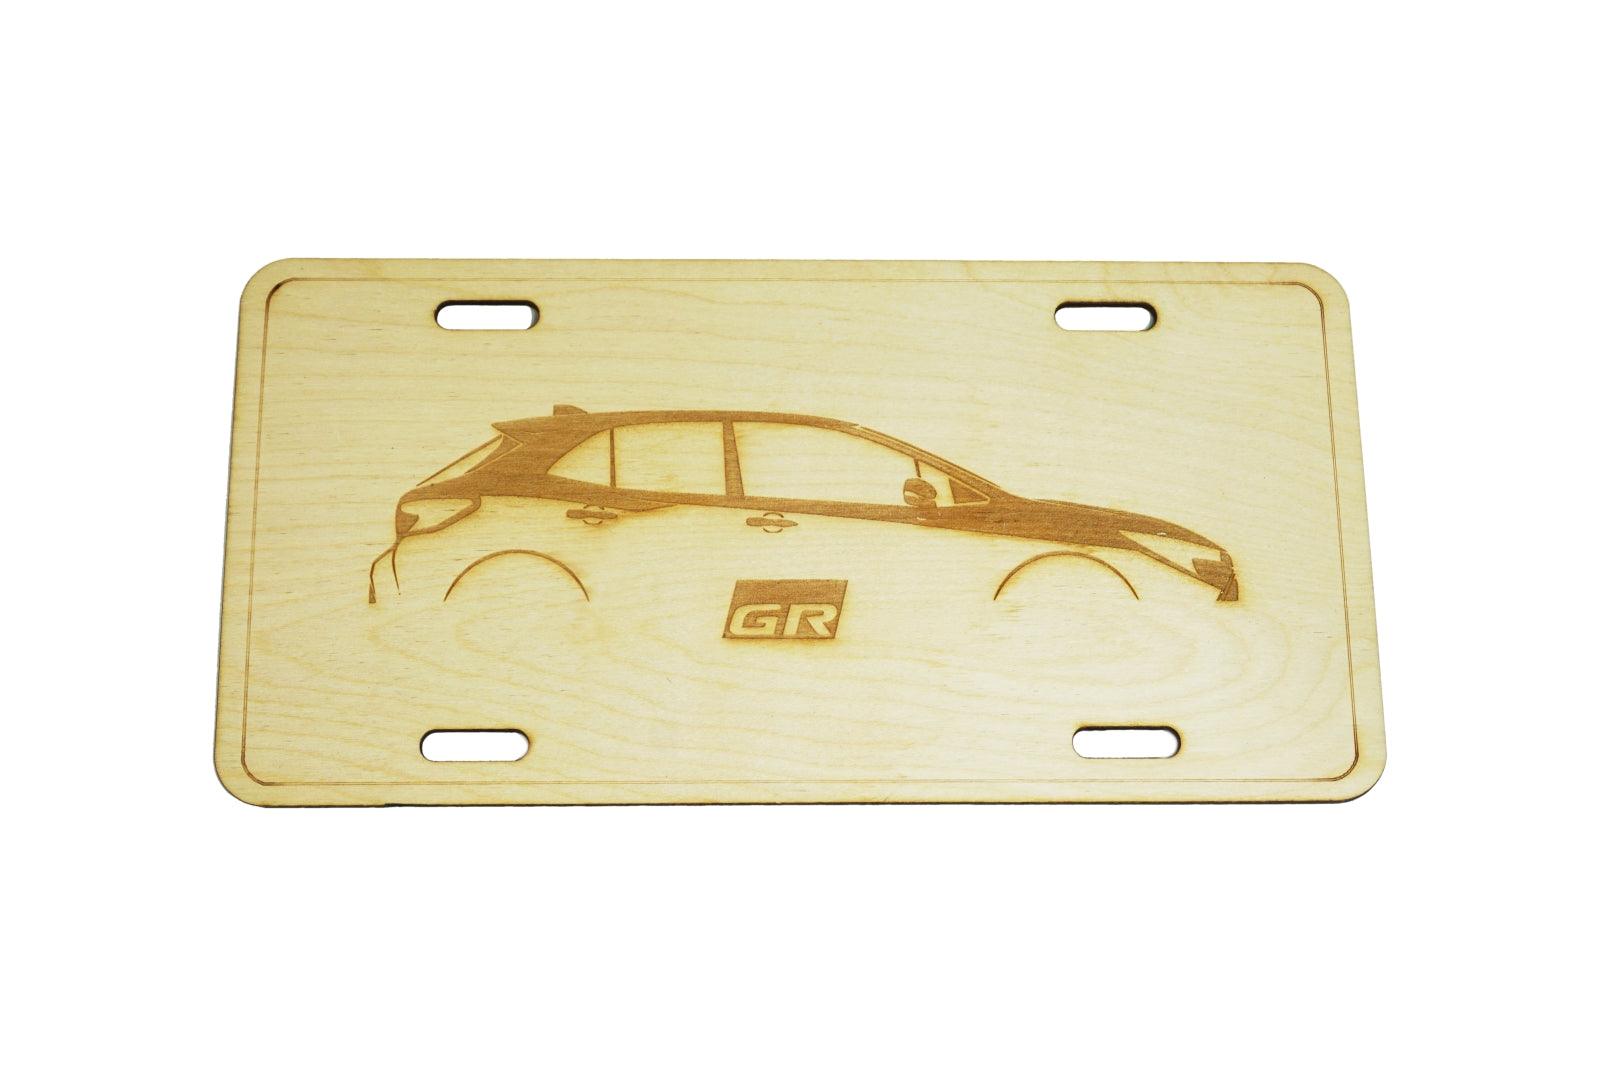 ZSPEC Toyota Corolla GR Sports Compact Hatch-Back Car License Plate, Birch, Ornamental  1/8' Birch Plywood construction.  Same size as a traditional license plate ZSPEC Design LLC Toyota Landcruiser